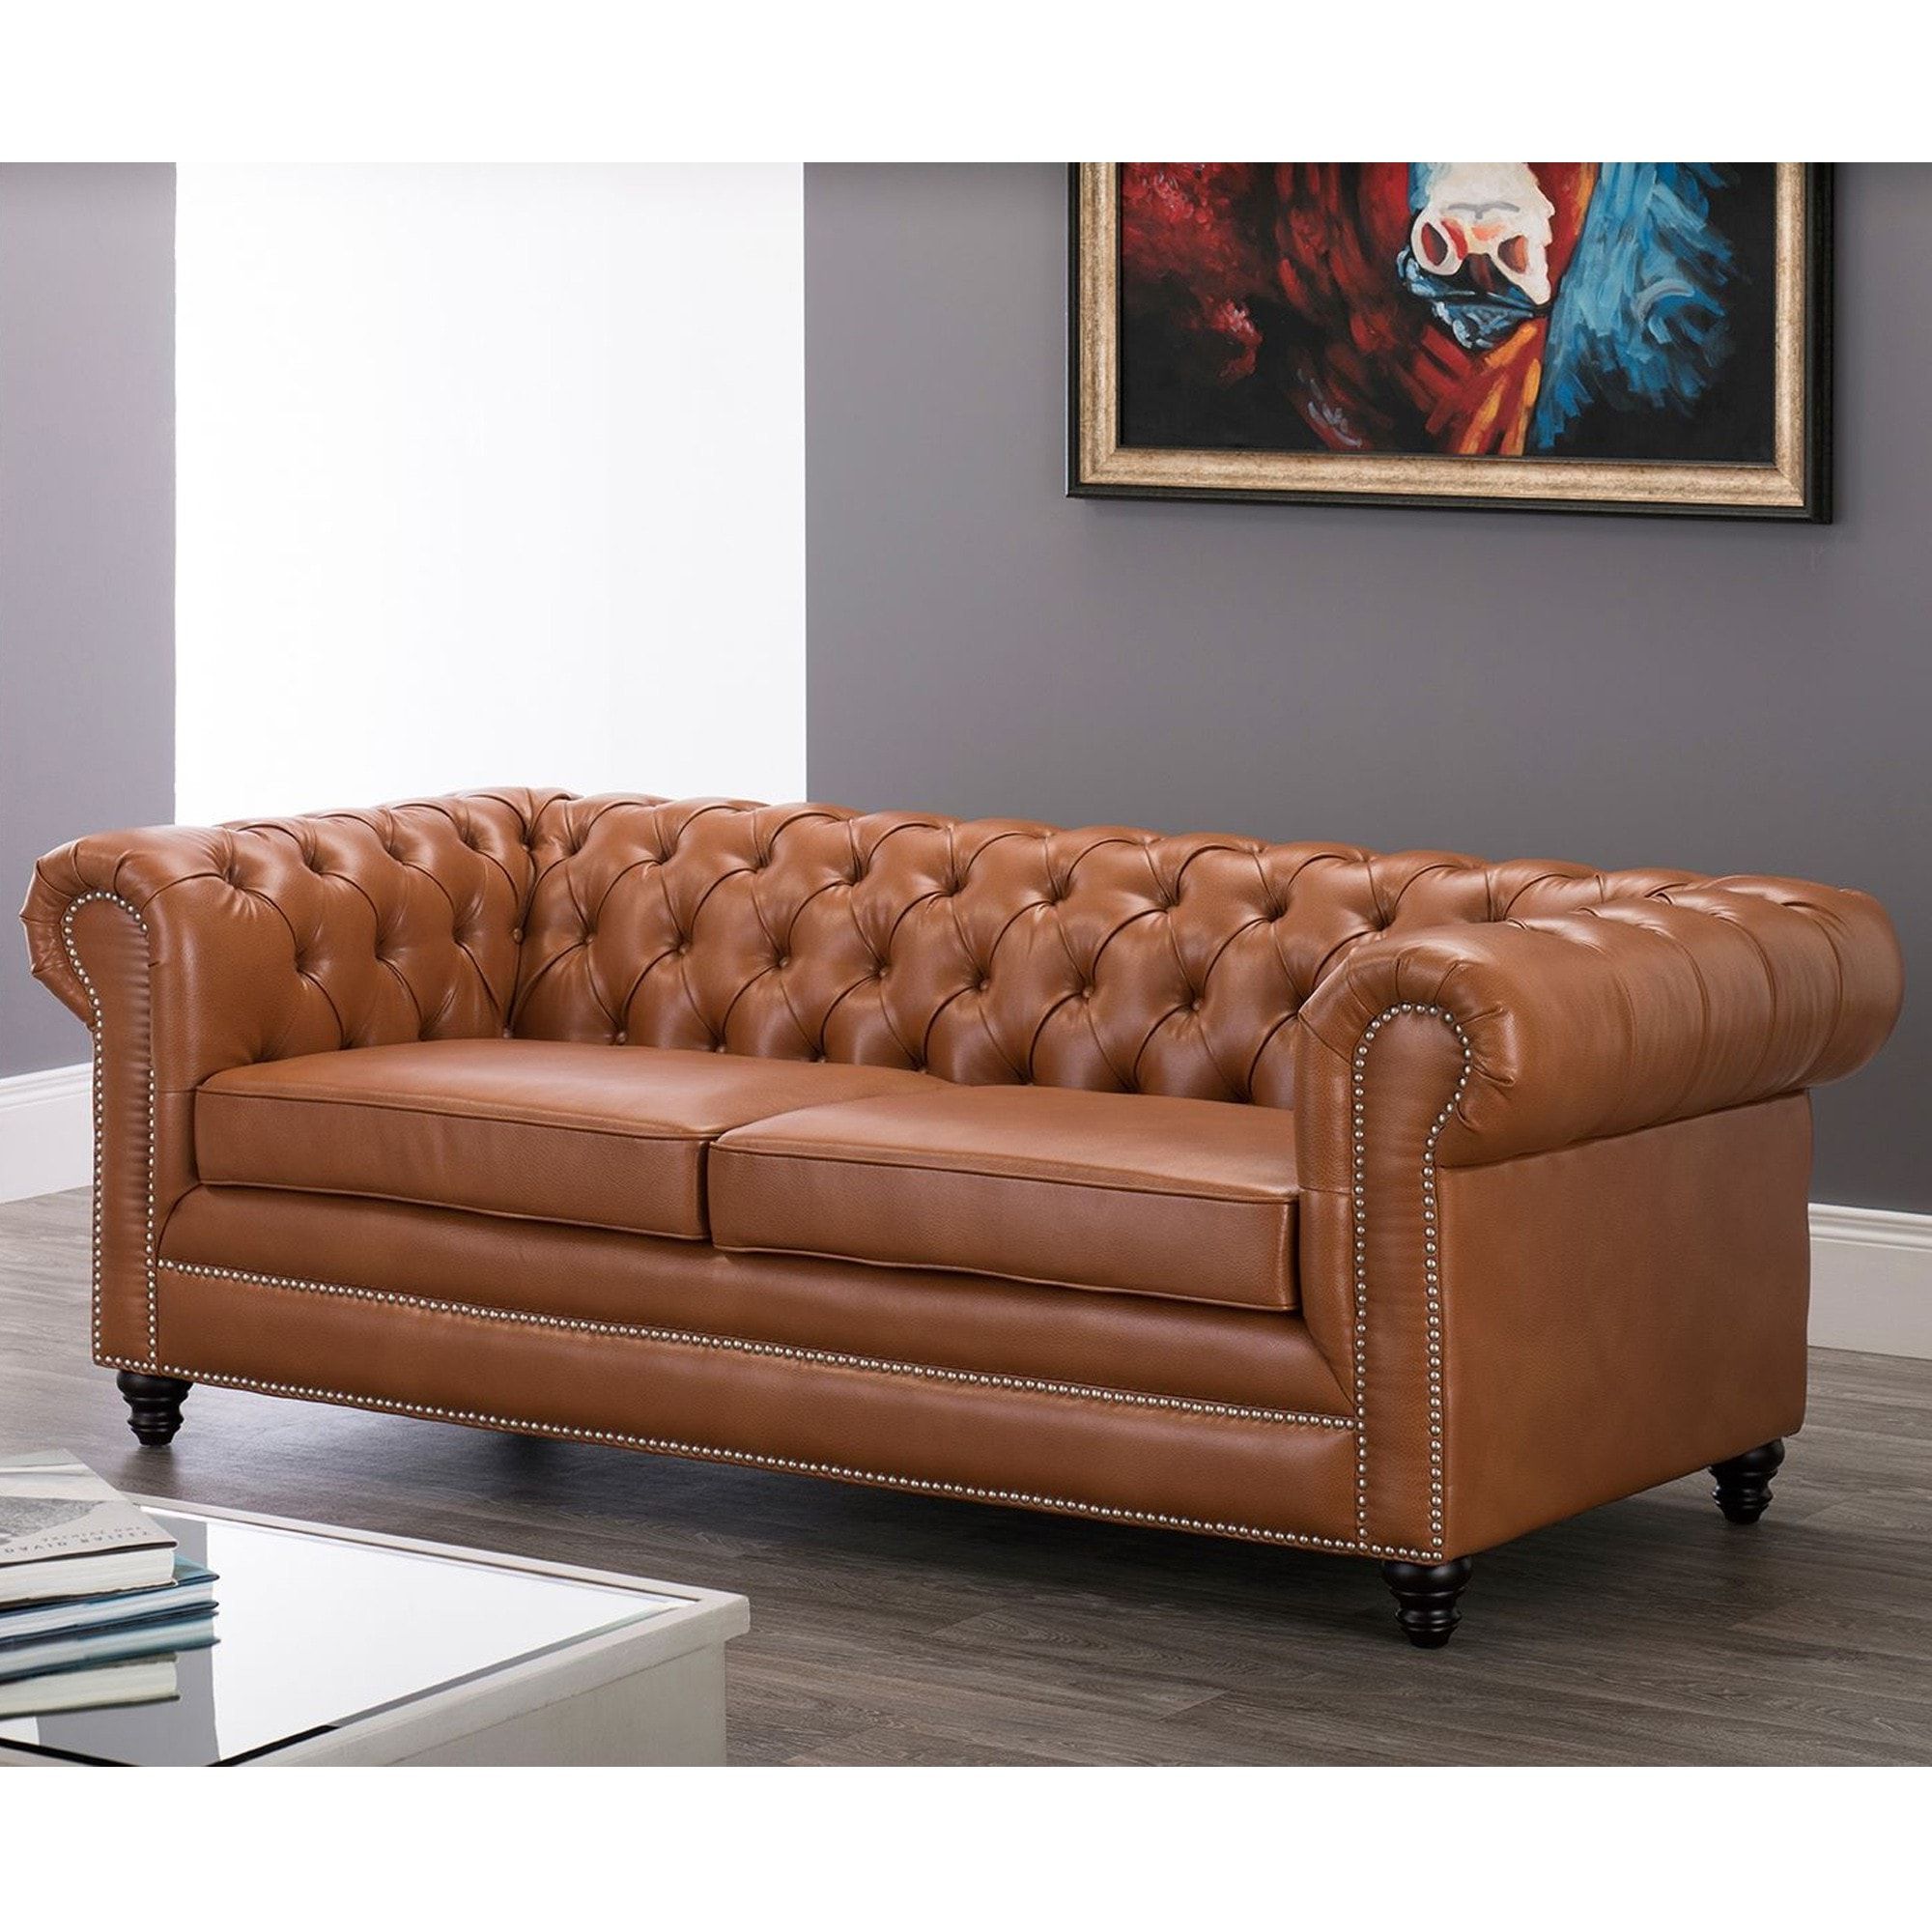 Tan Chesterfield Sofa With Fashionable Faux Leather Sofas (View 4 of 15)